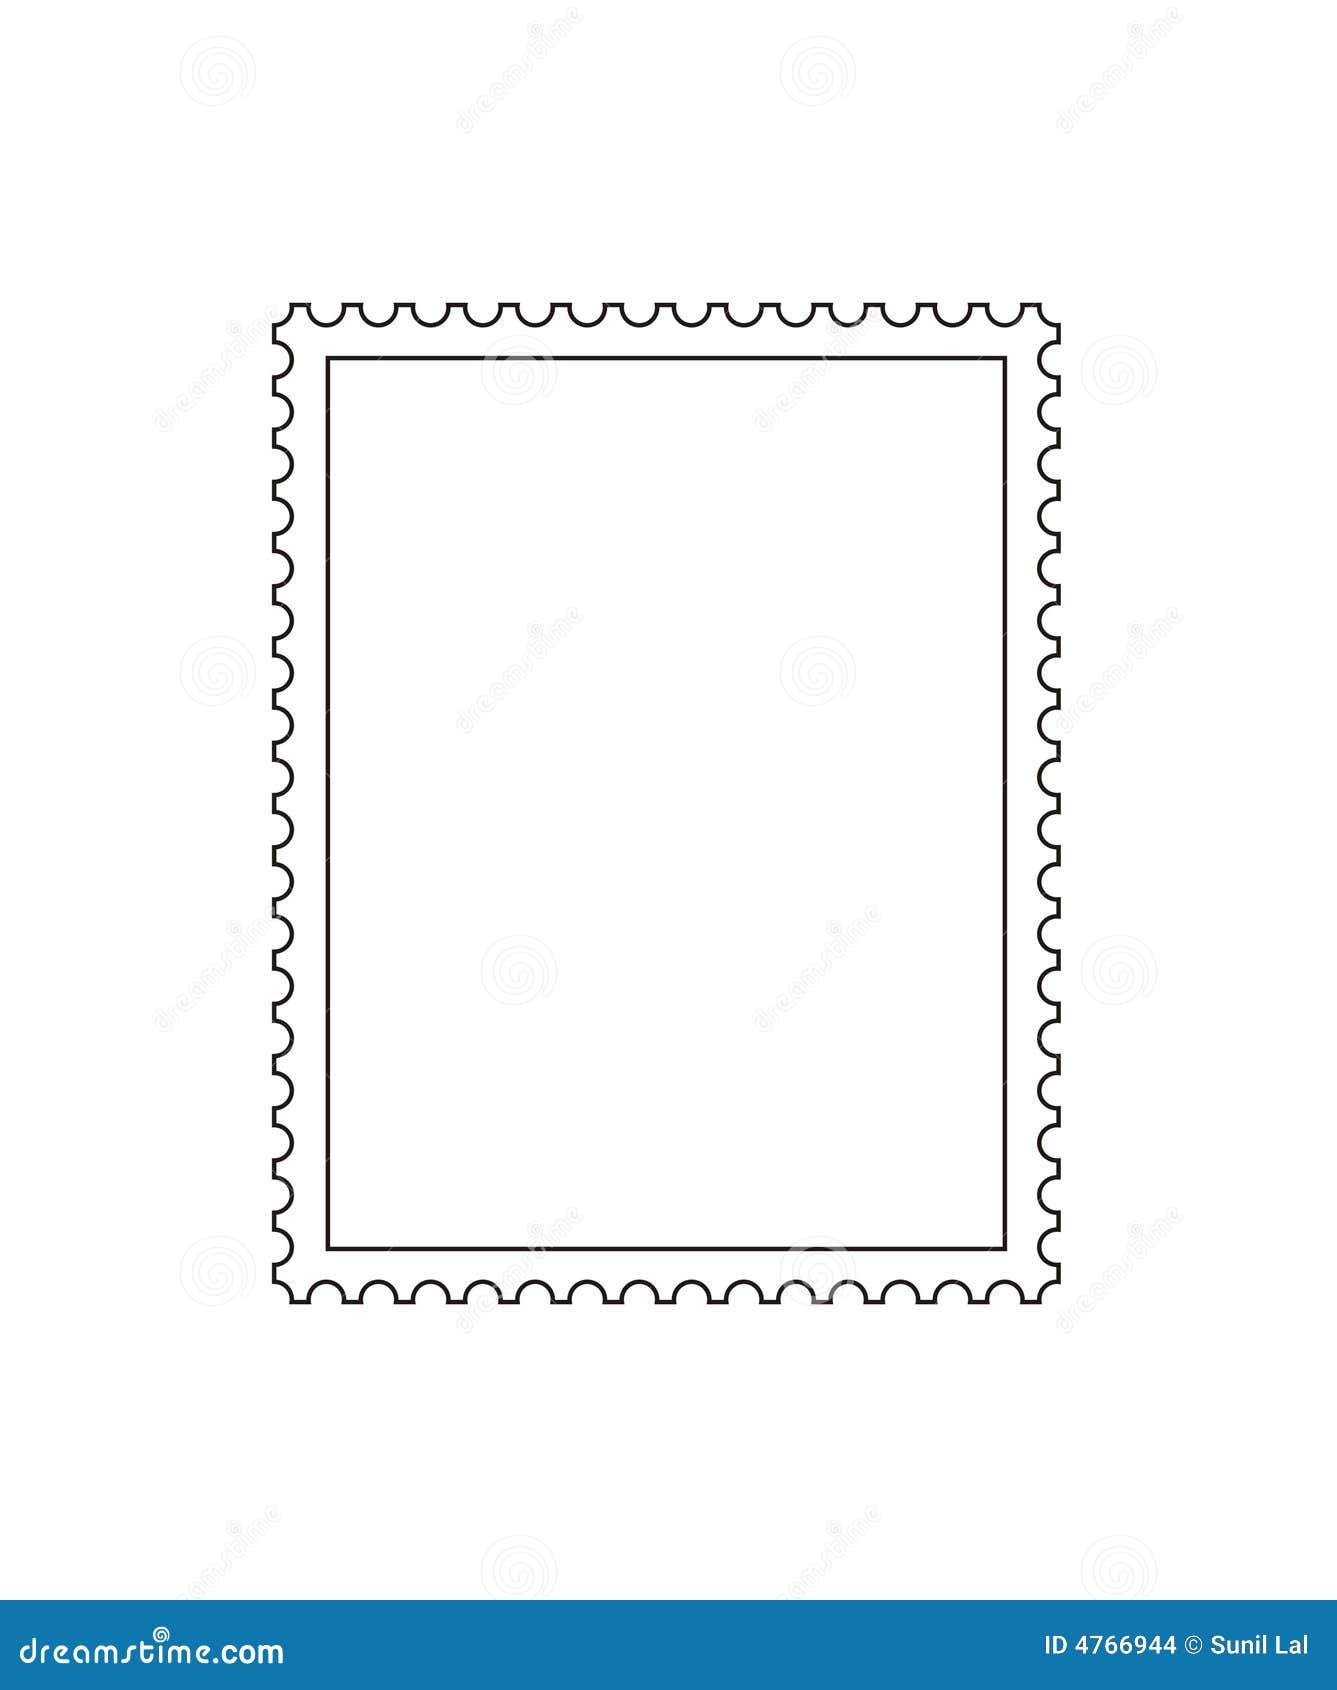 paper outline format Outline be of designers. to available stamp by Also postage used in